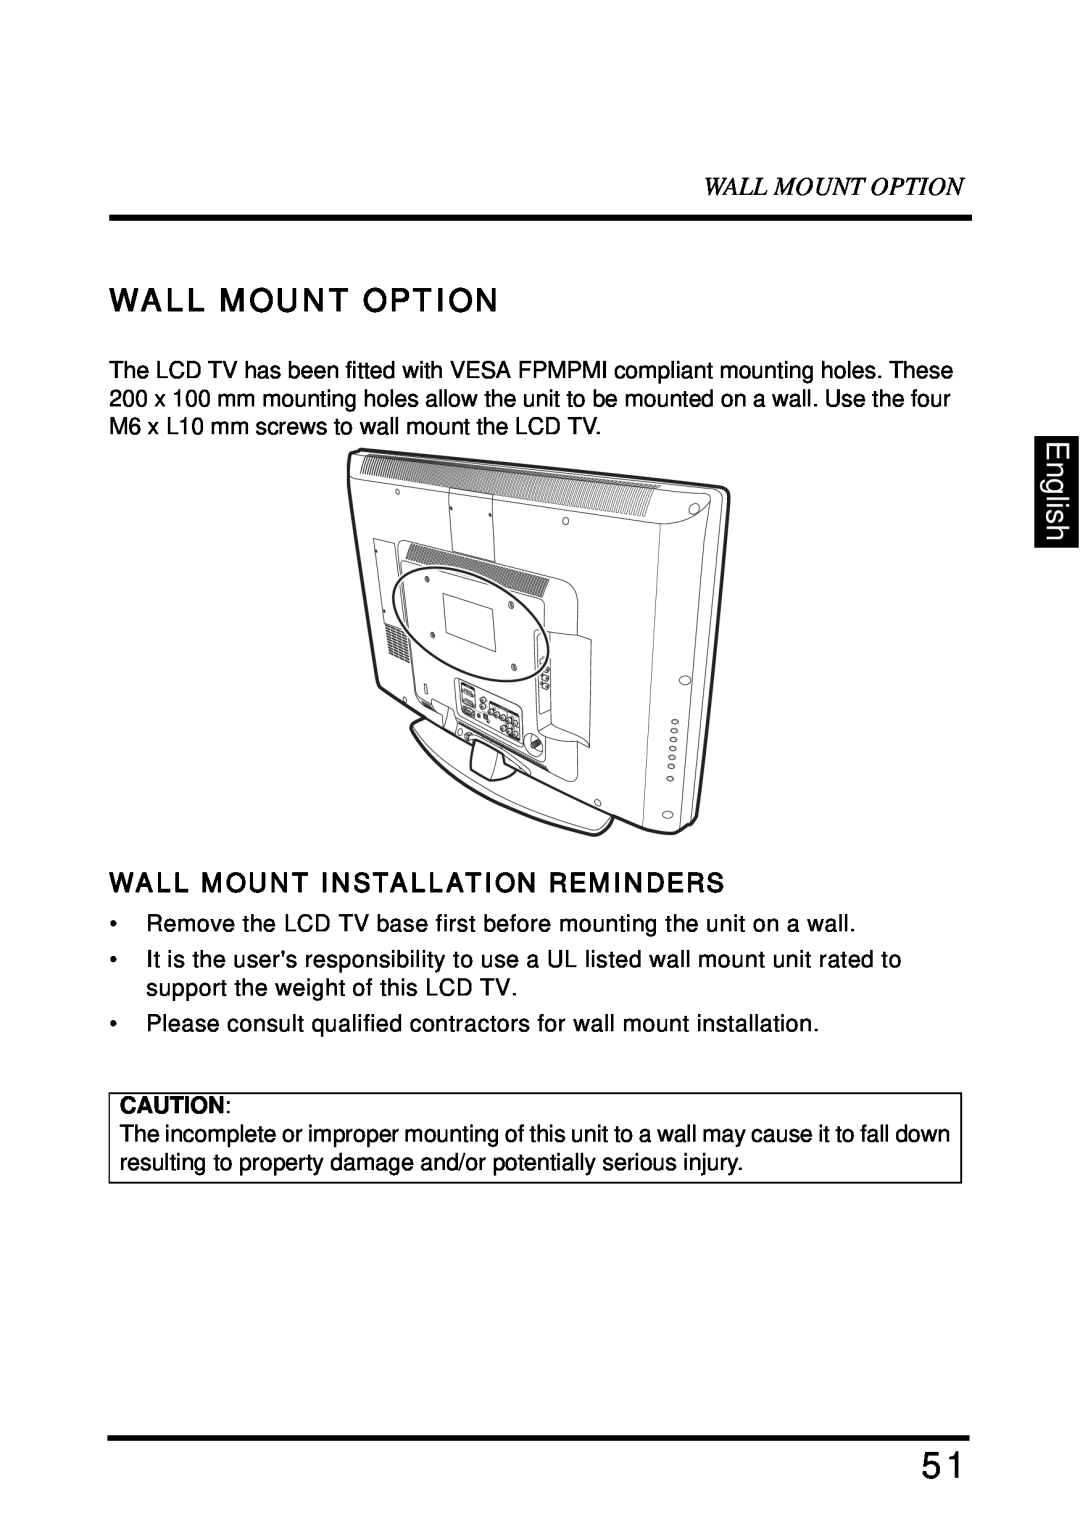 Westinghouse SK-32H640G user manual Wall Mount Option, English, Wall Mount Installation Reminders 